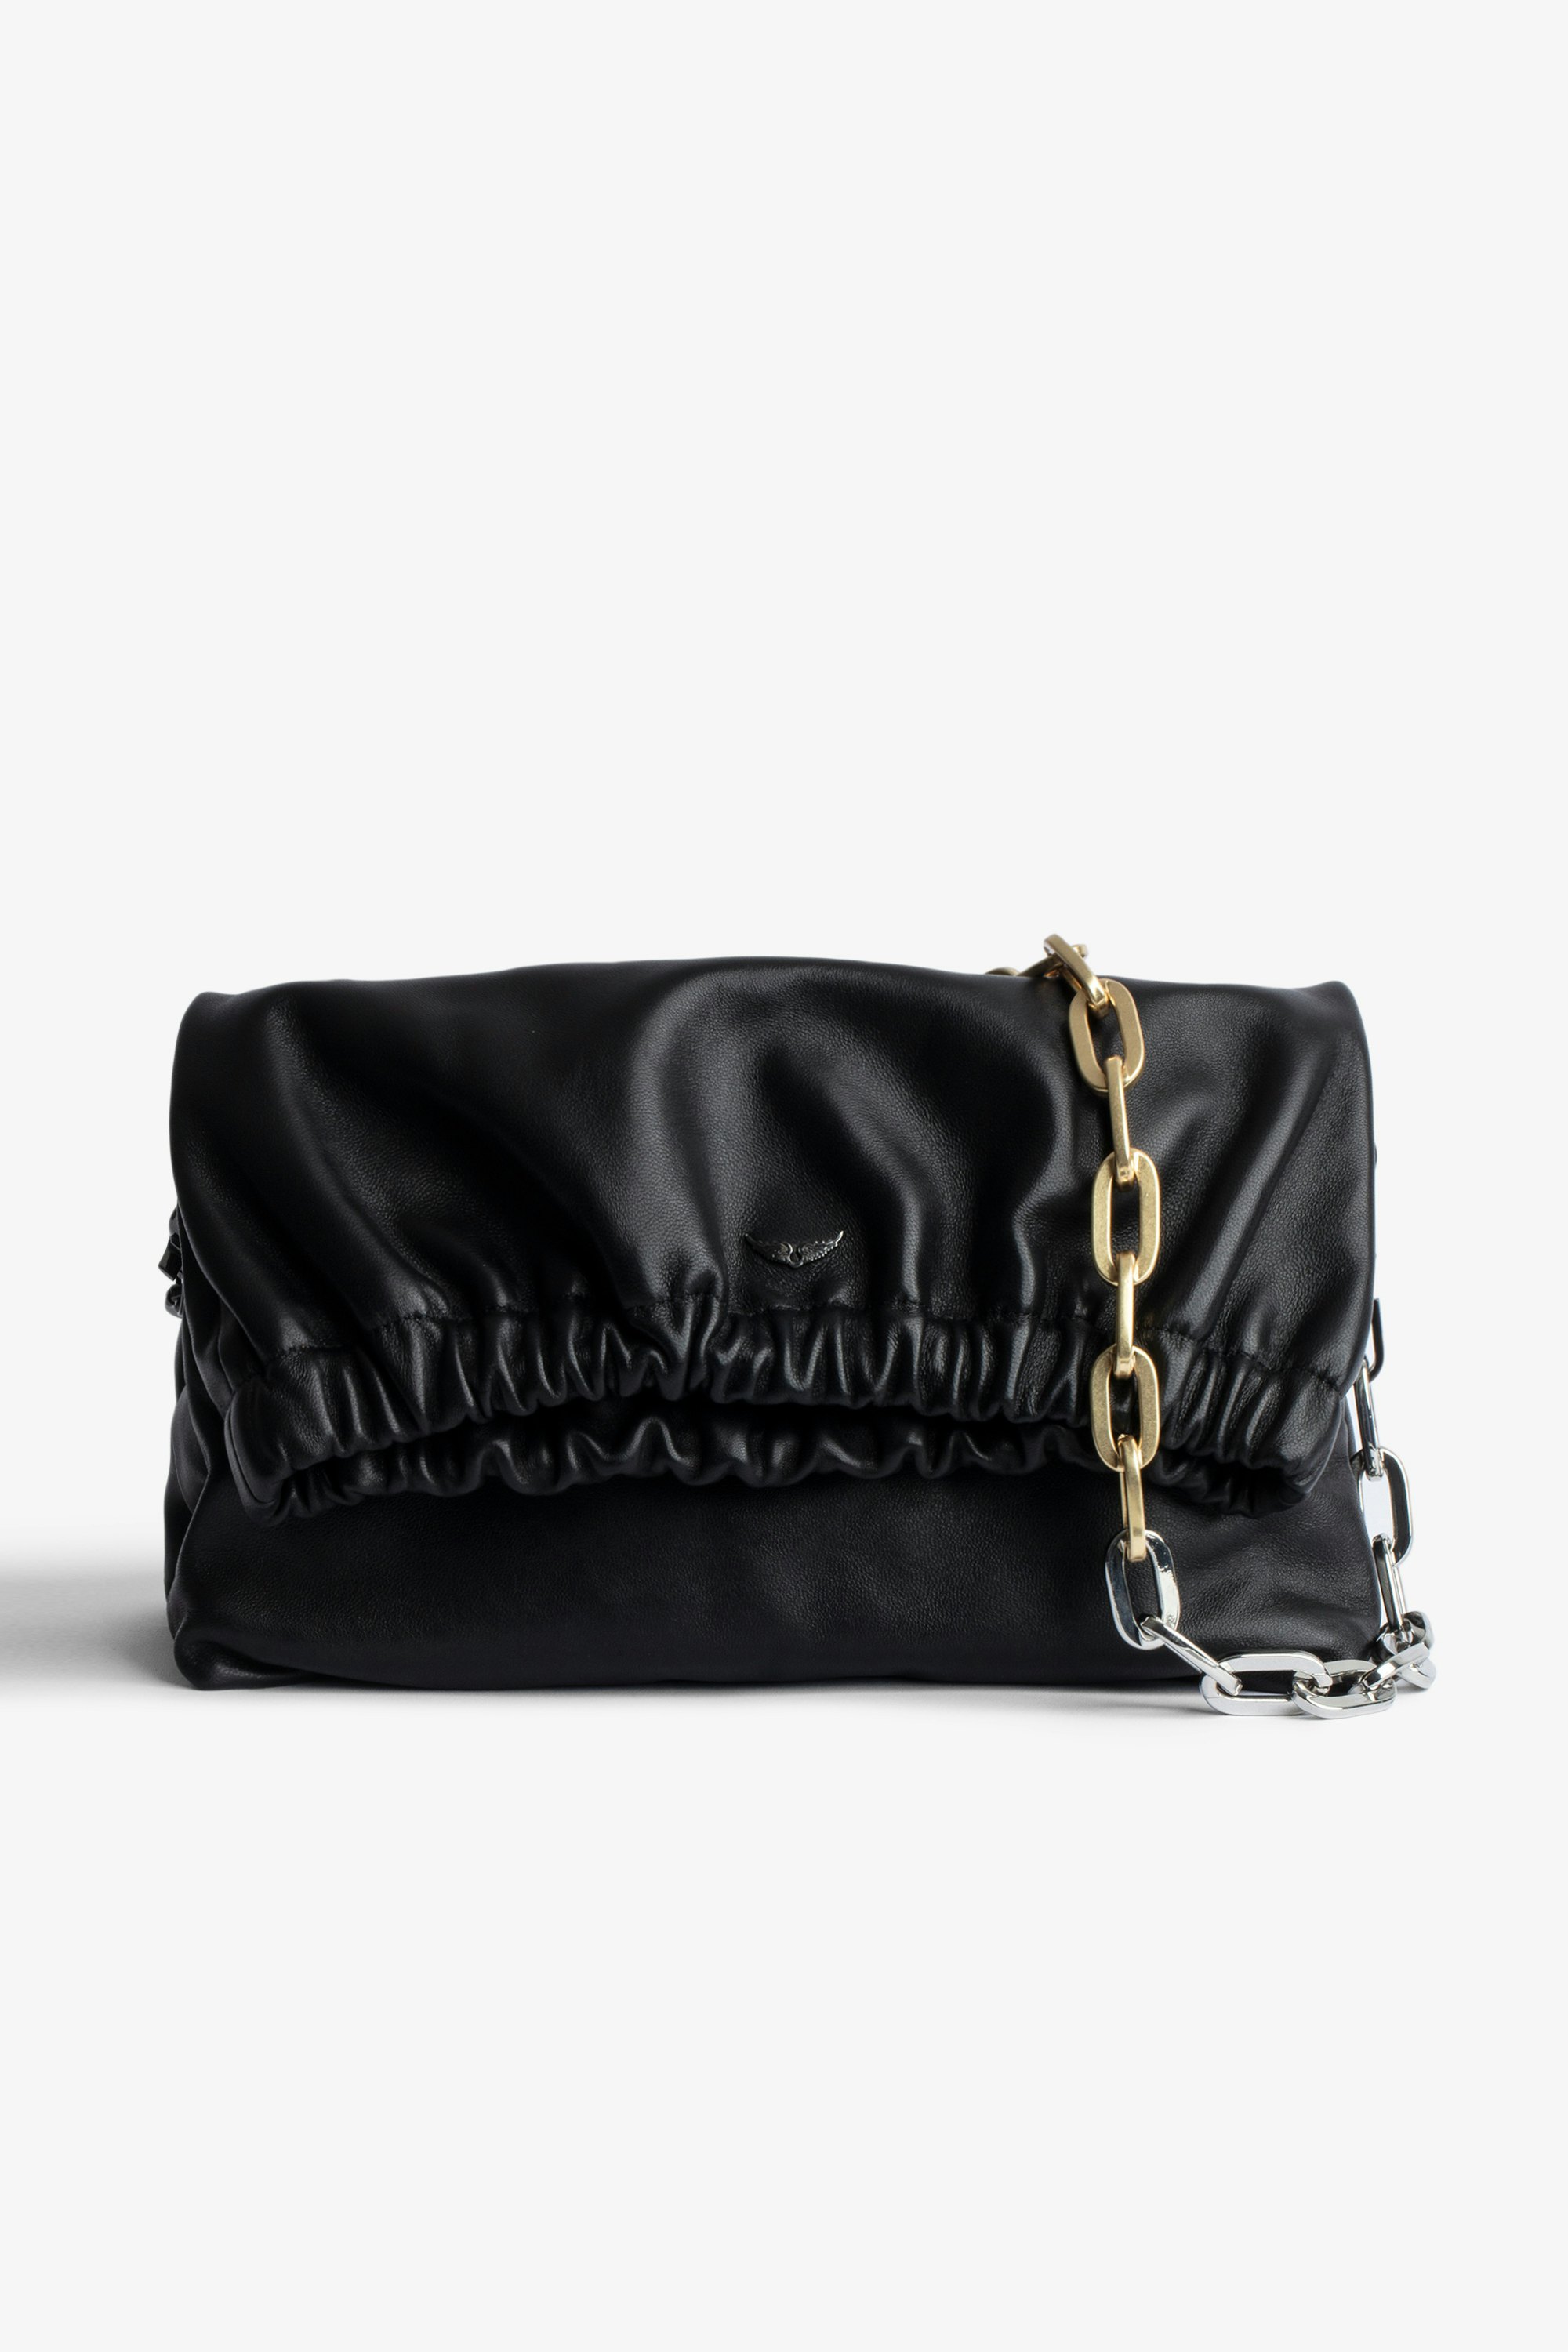 Rockyssime Bag - Women’s clutch bag in black smooth leather with two-tone metal chain